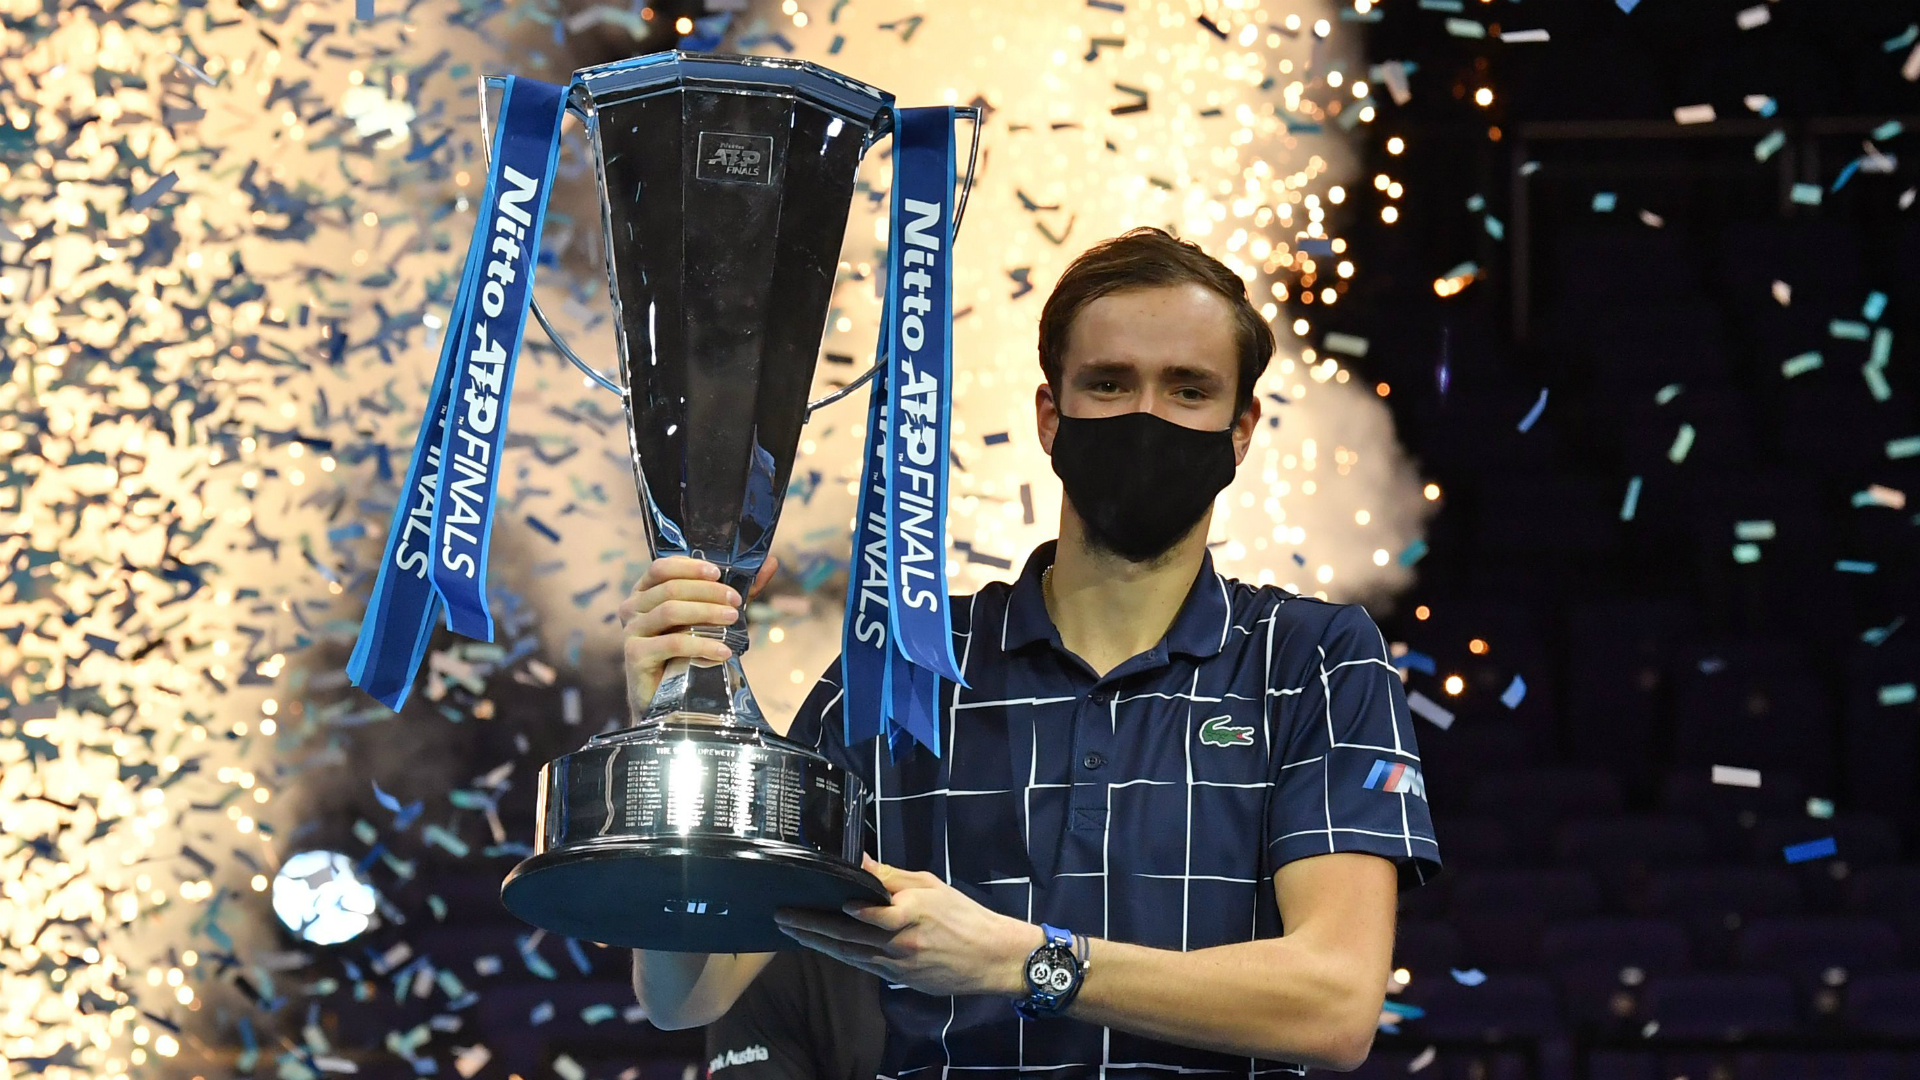 After becoming the ATP Finals champion, Daniil Medvedev said he wants plenty more battles with beaten opponent Dominic Thiem.